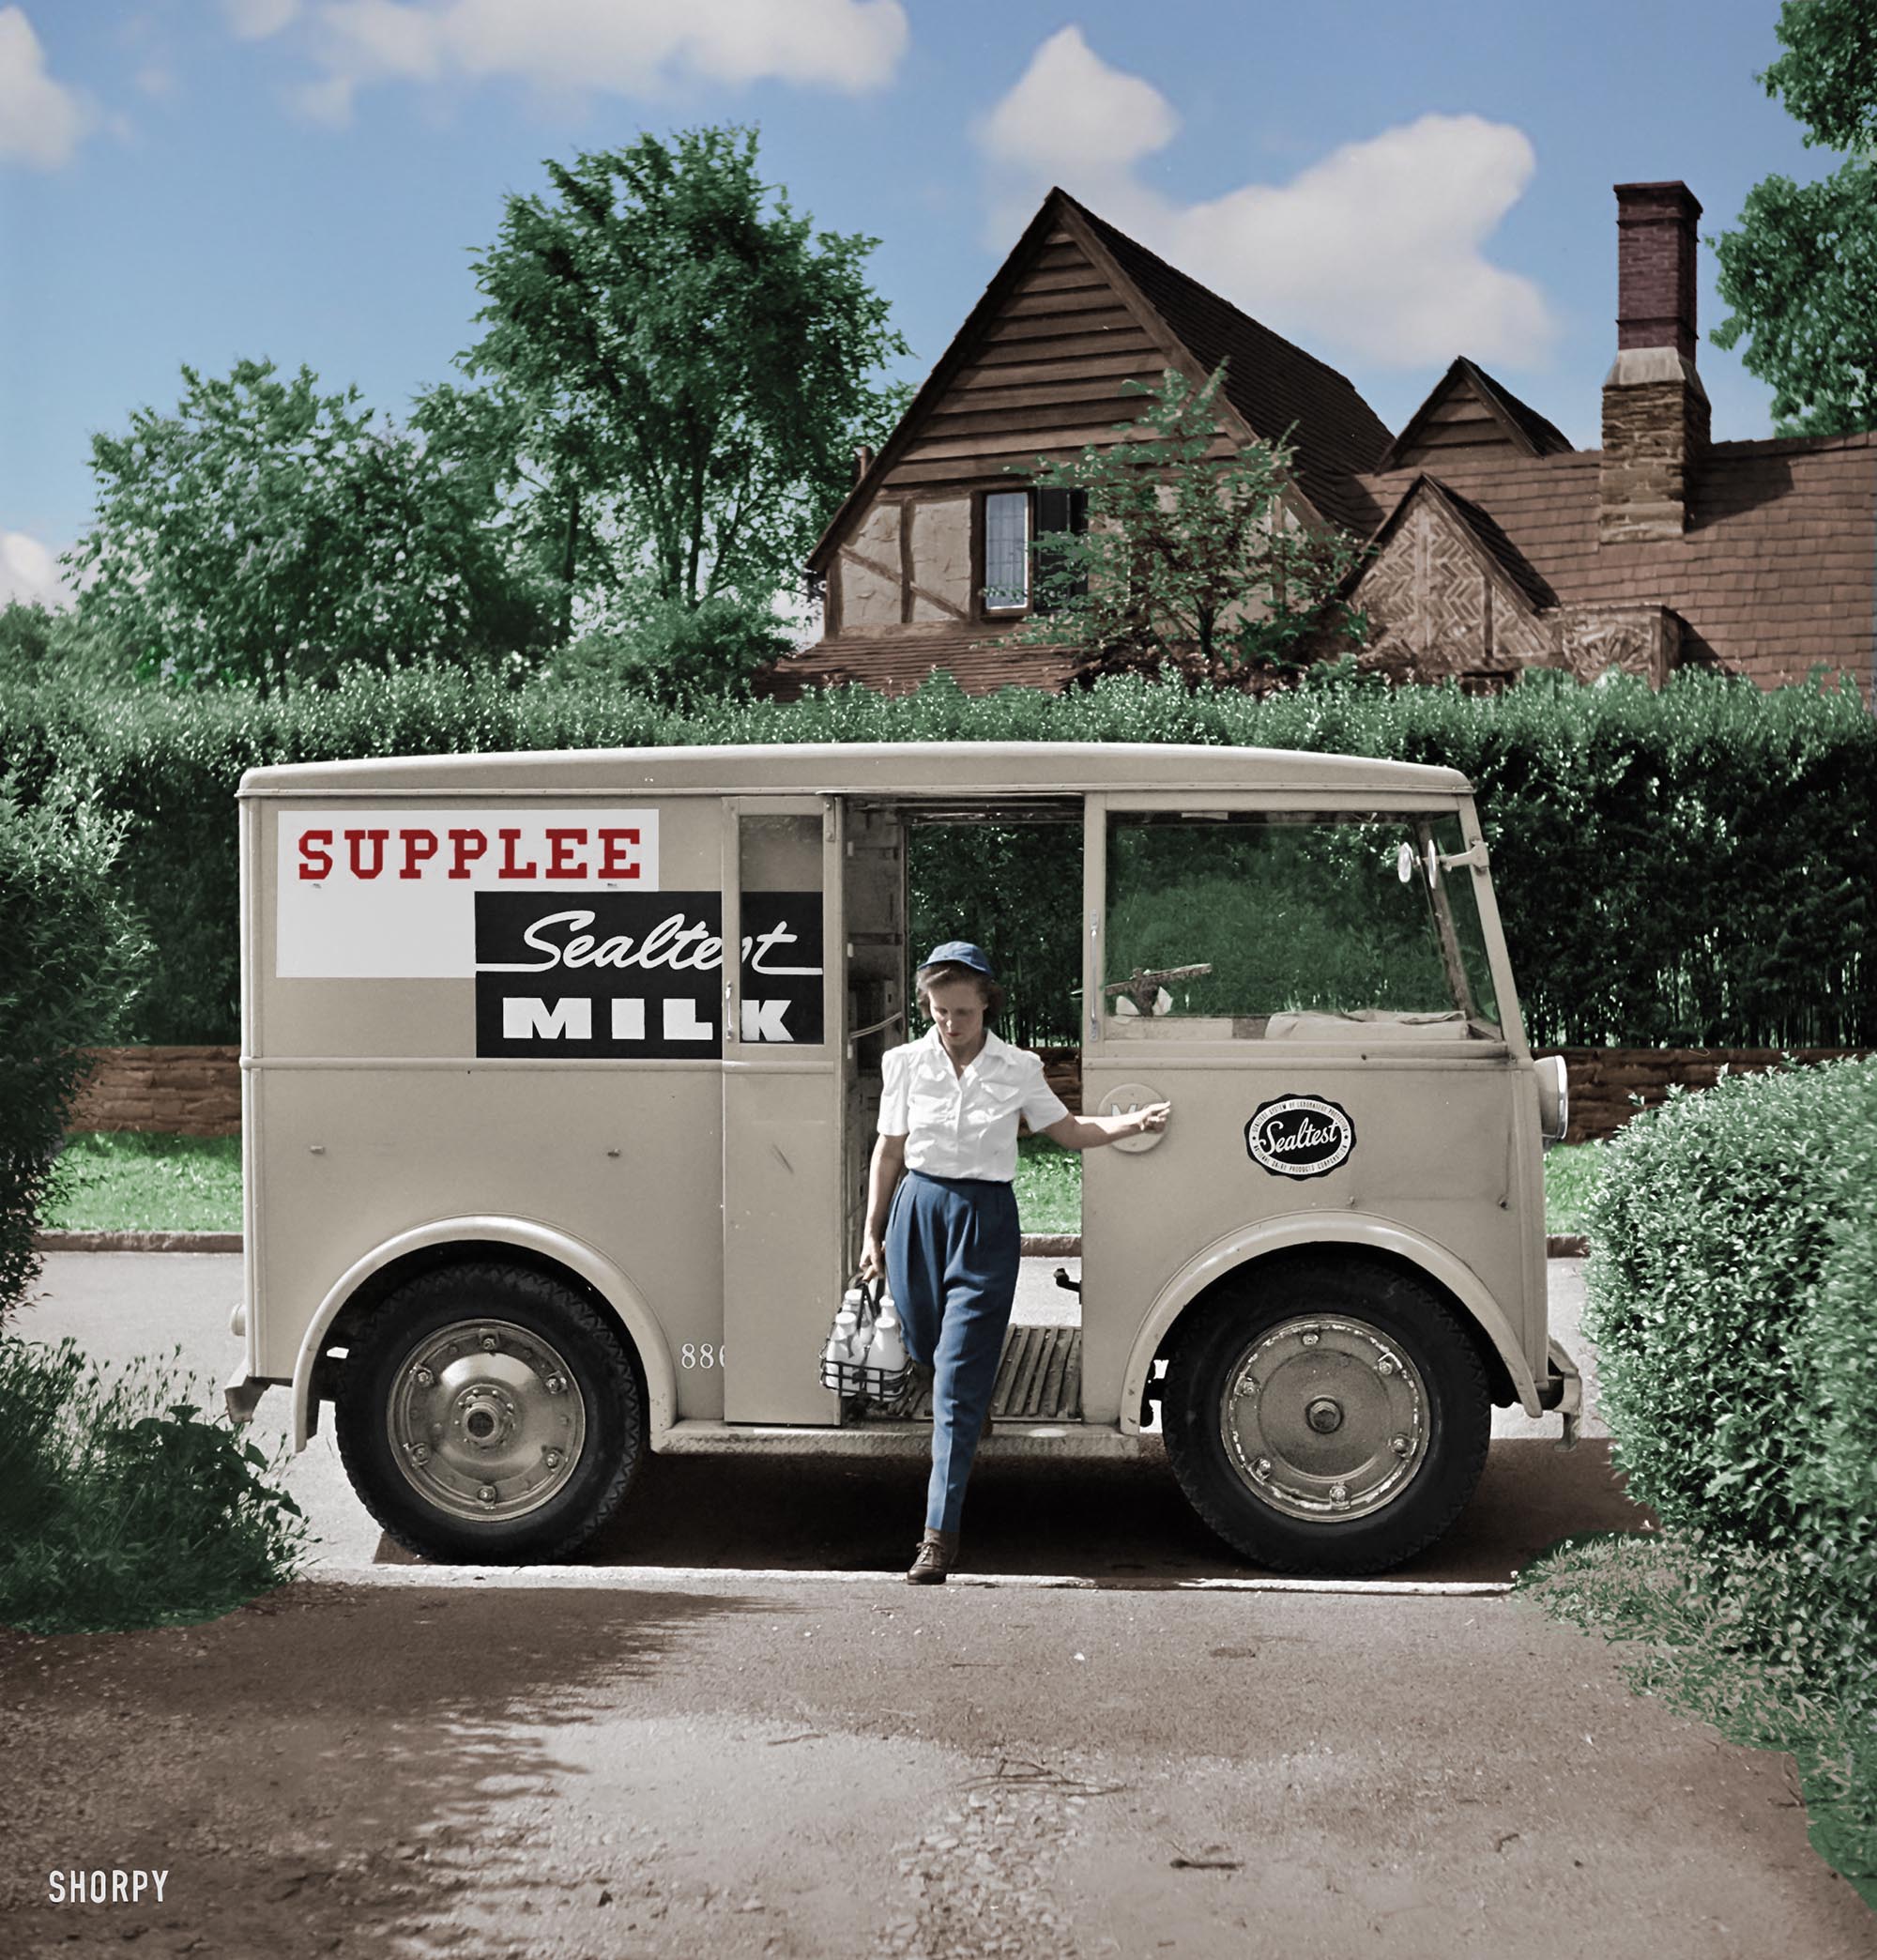 Colorized version of this photo. The good old days of home delivered milk (and cream). How many people remember this? Unfortunately I do from the late 1940s or early 1950s.